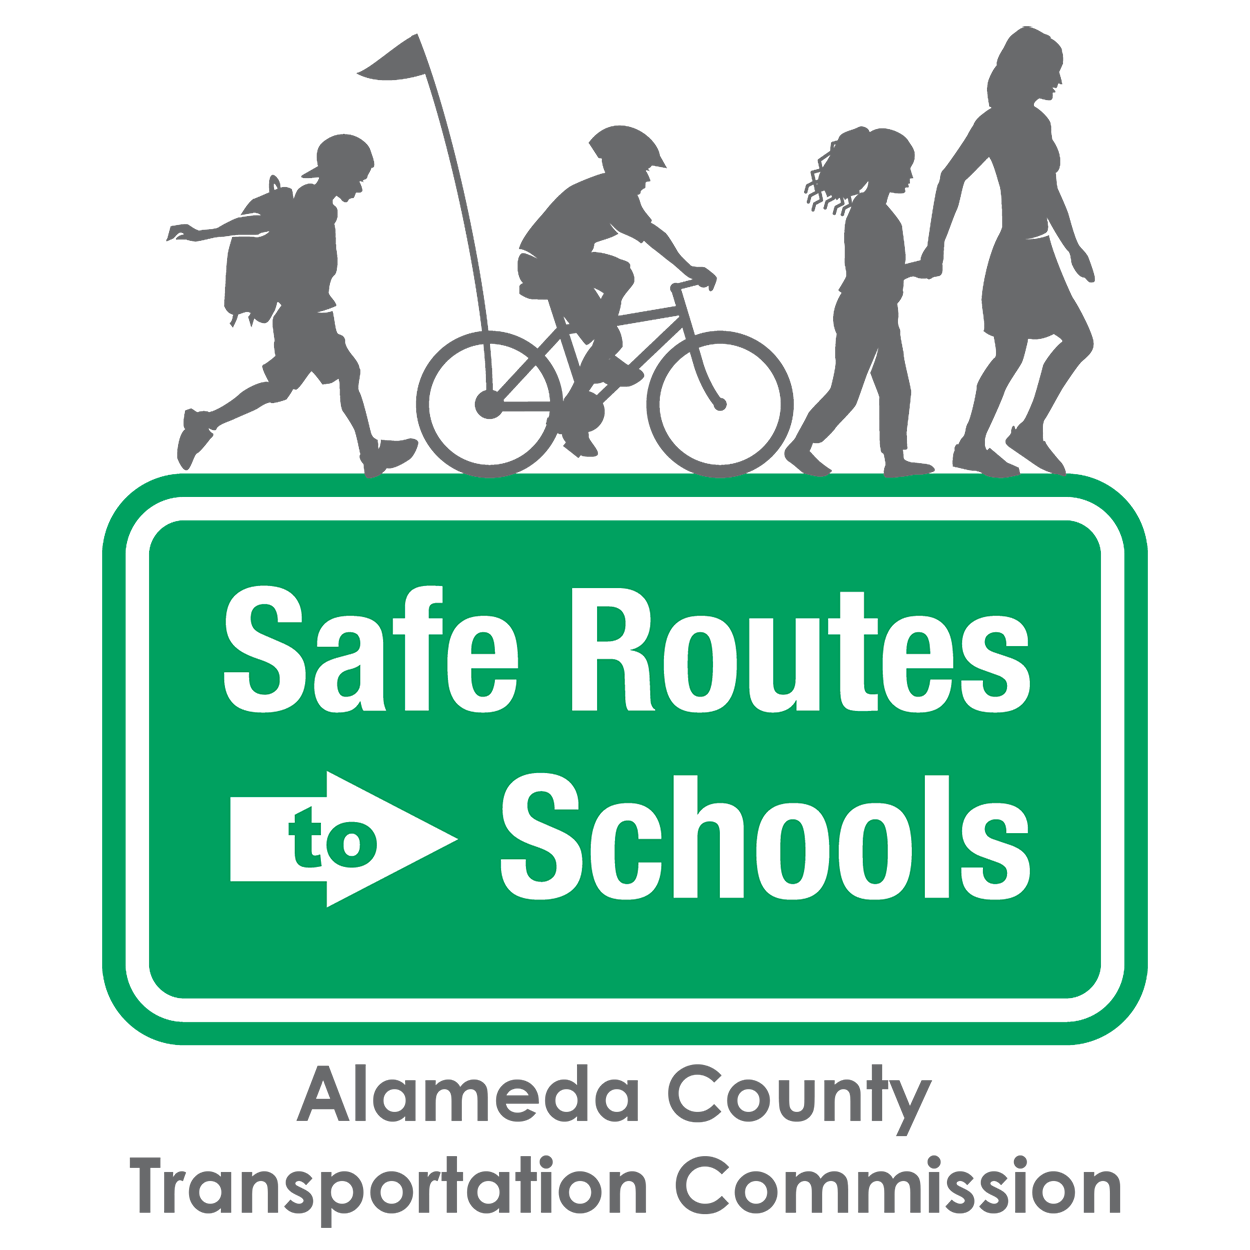 Congressman Eric Swalwell Secures $1.7M for Safe Routes to Schools Program